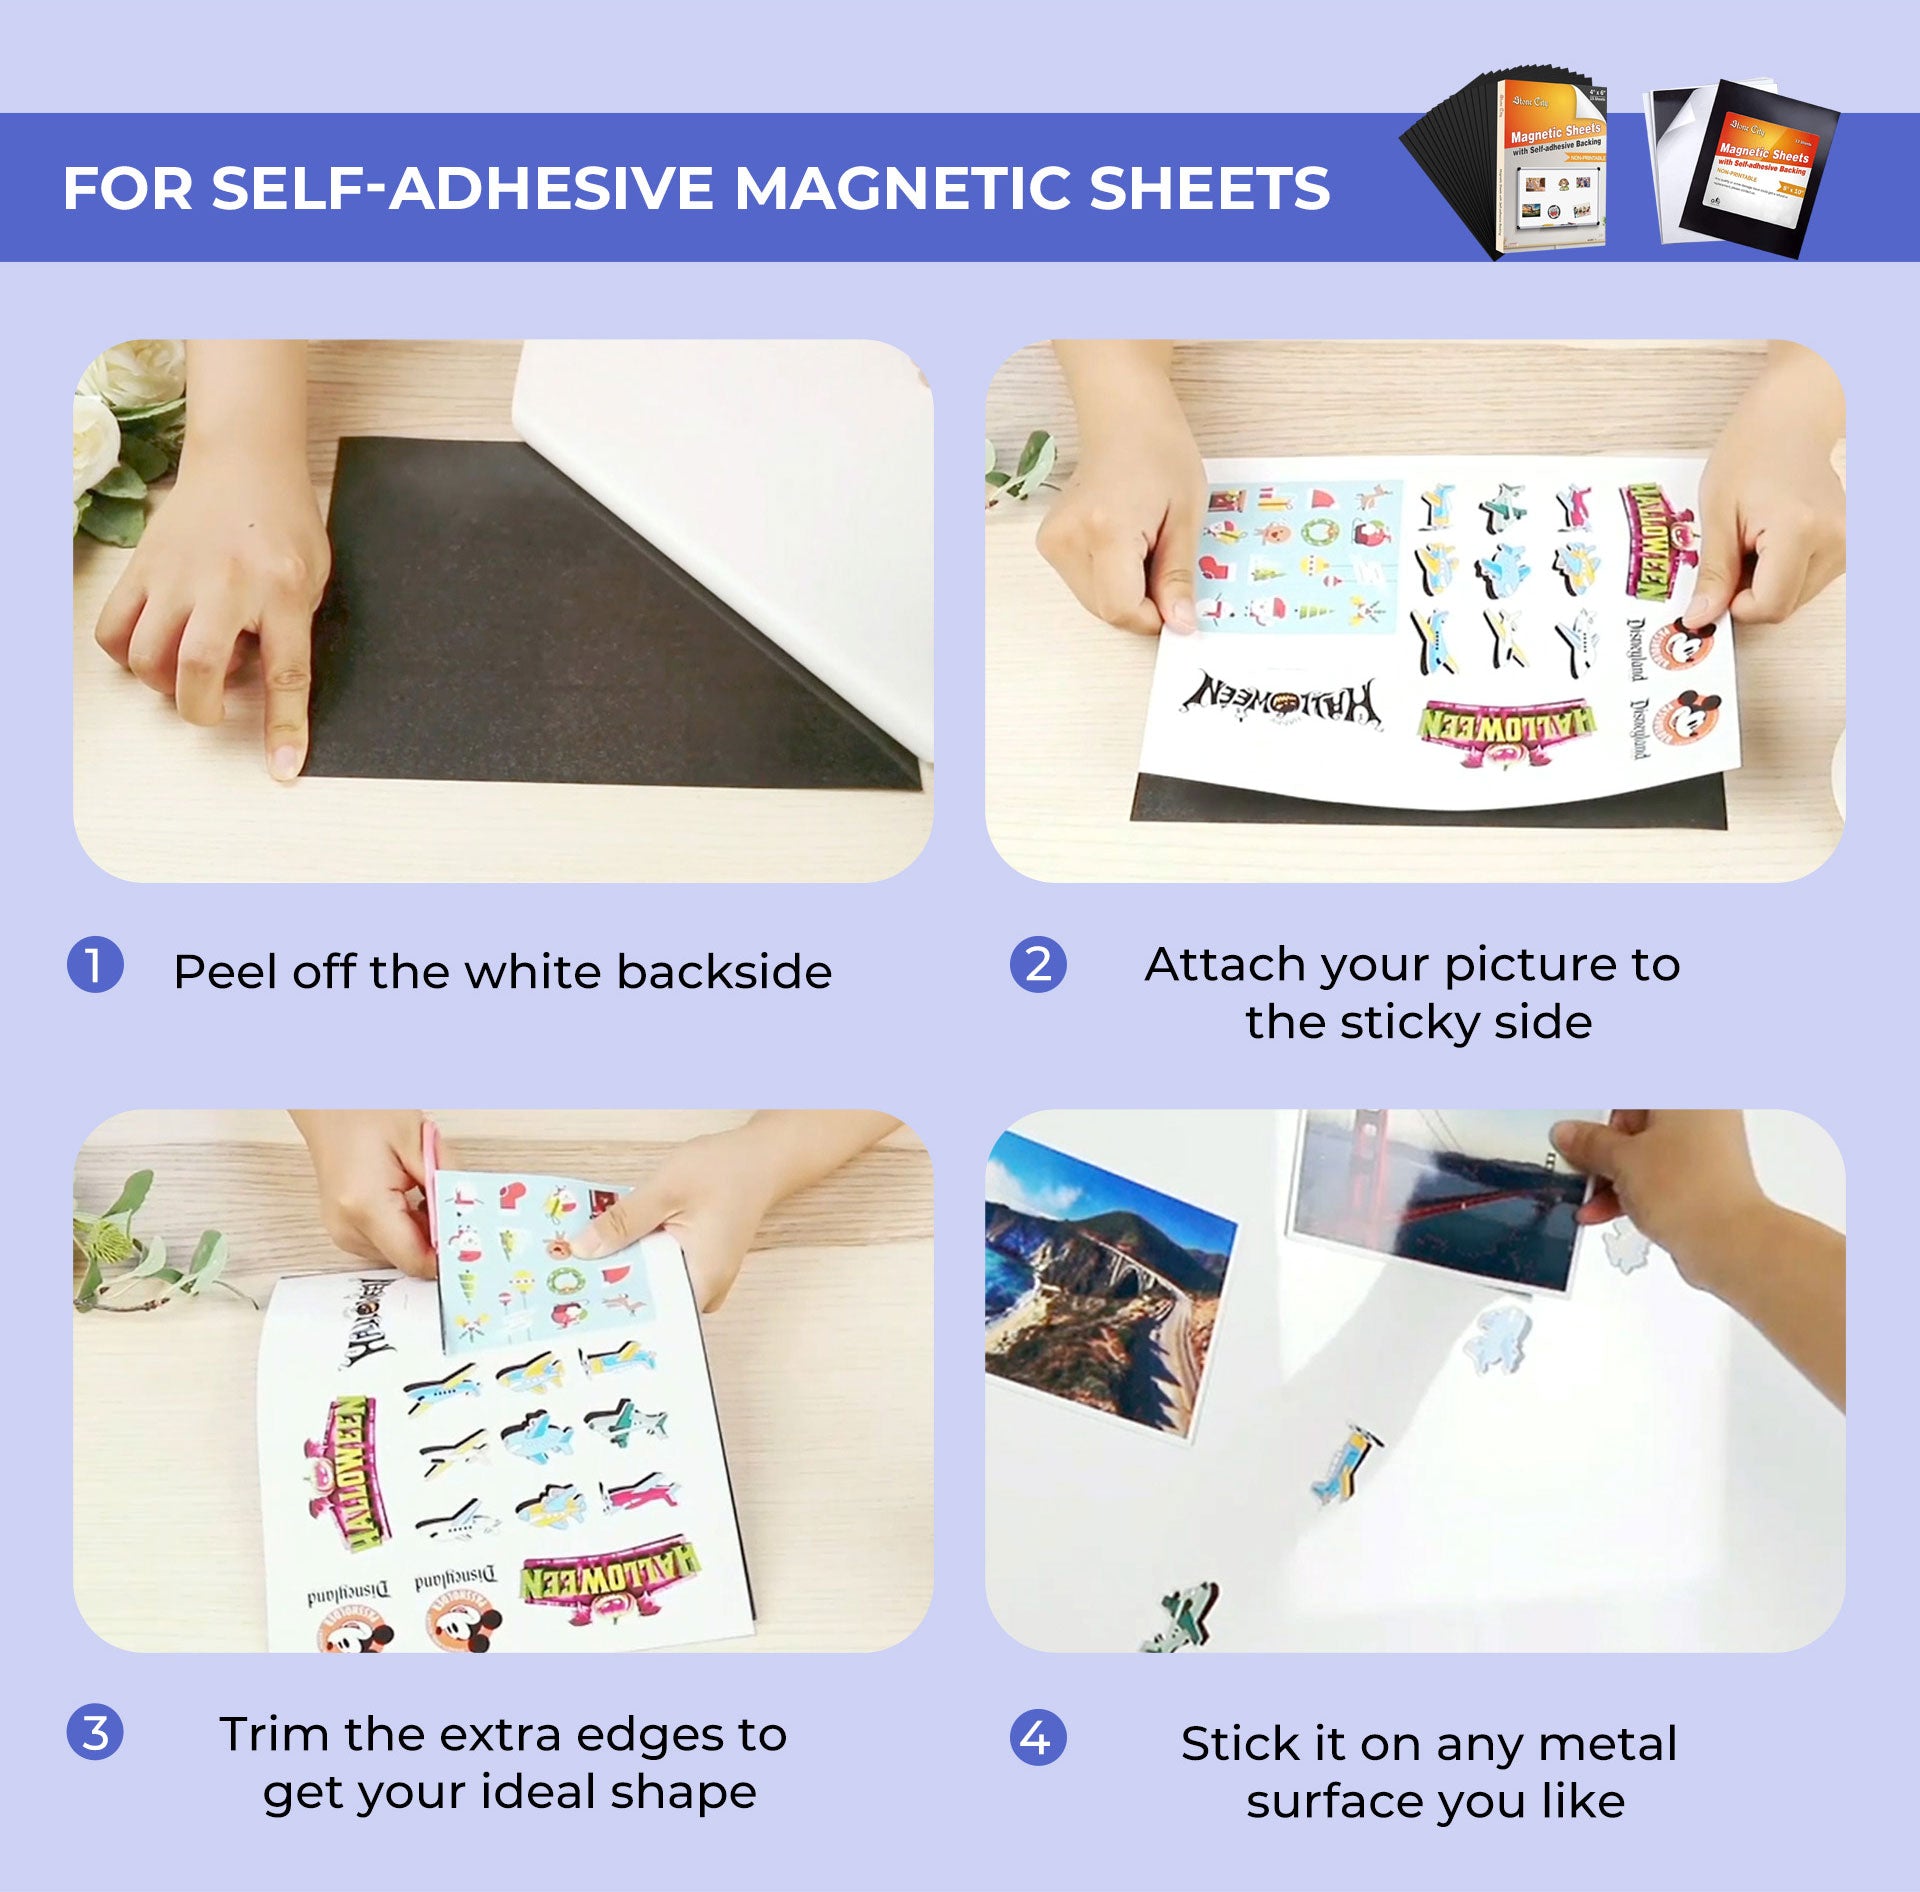 8.5 x 11 Adhesive Magnet Sheets Archives - Discount Magnet